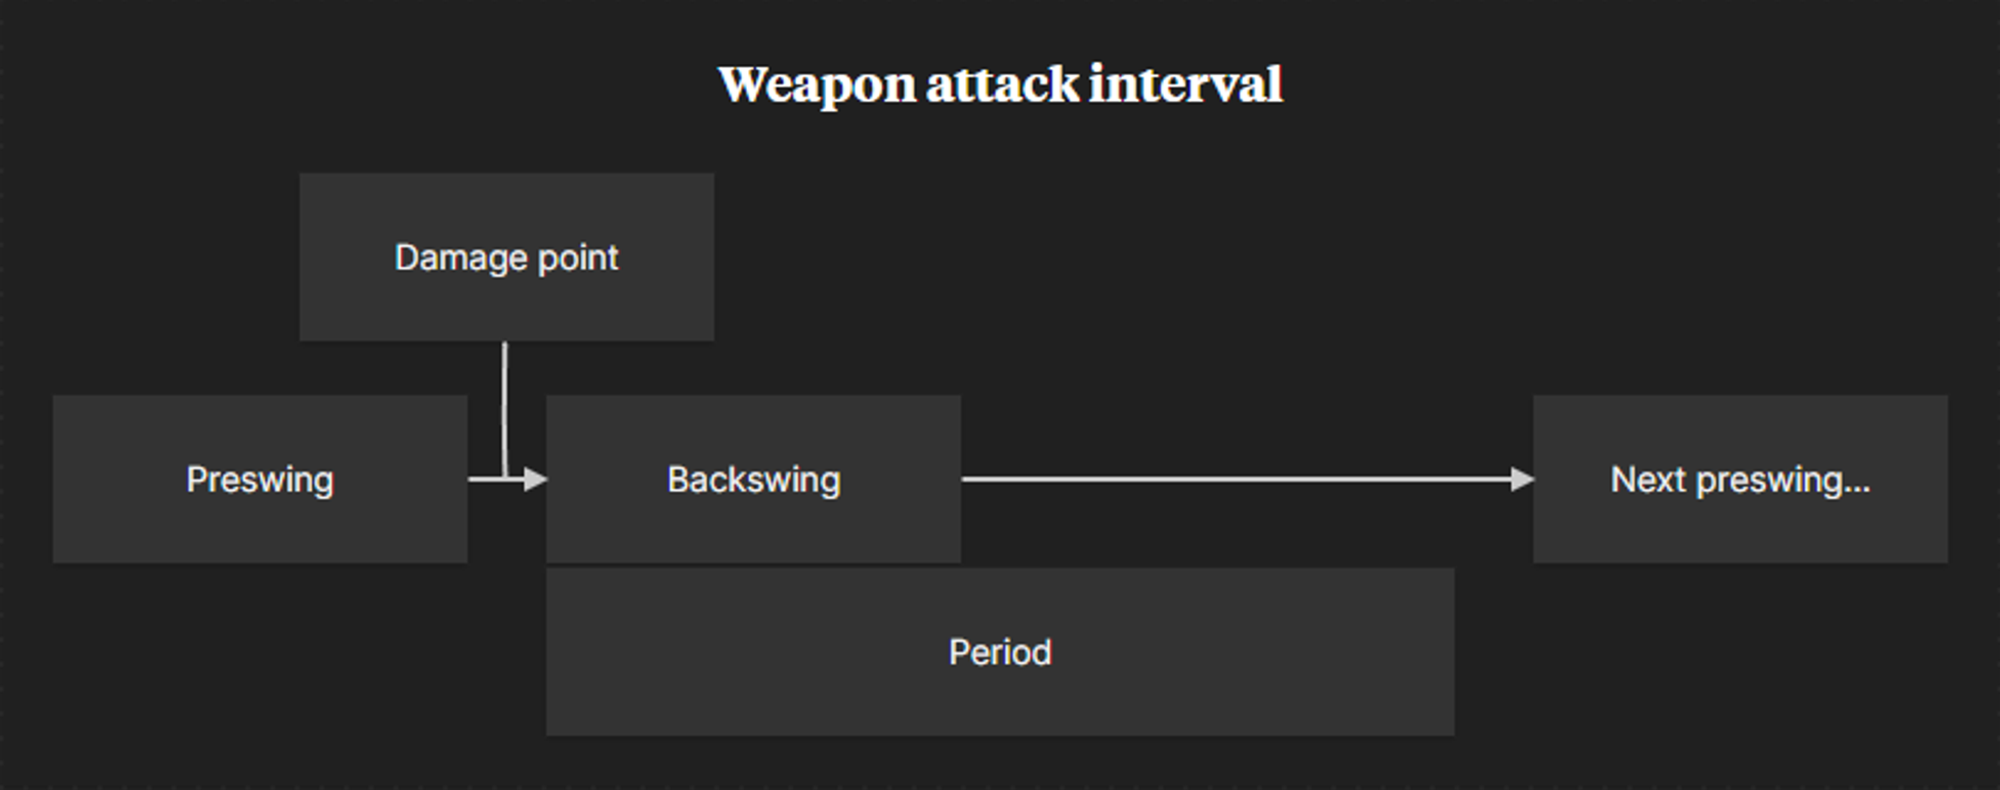 Weapon attack interval